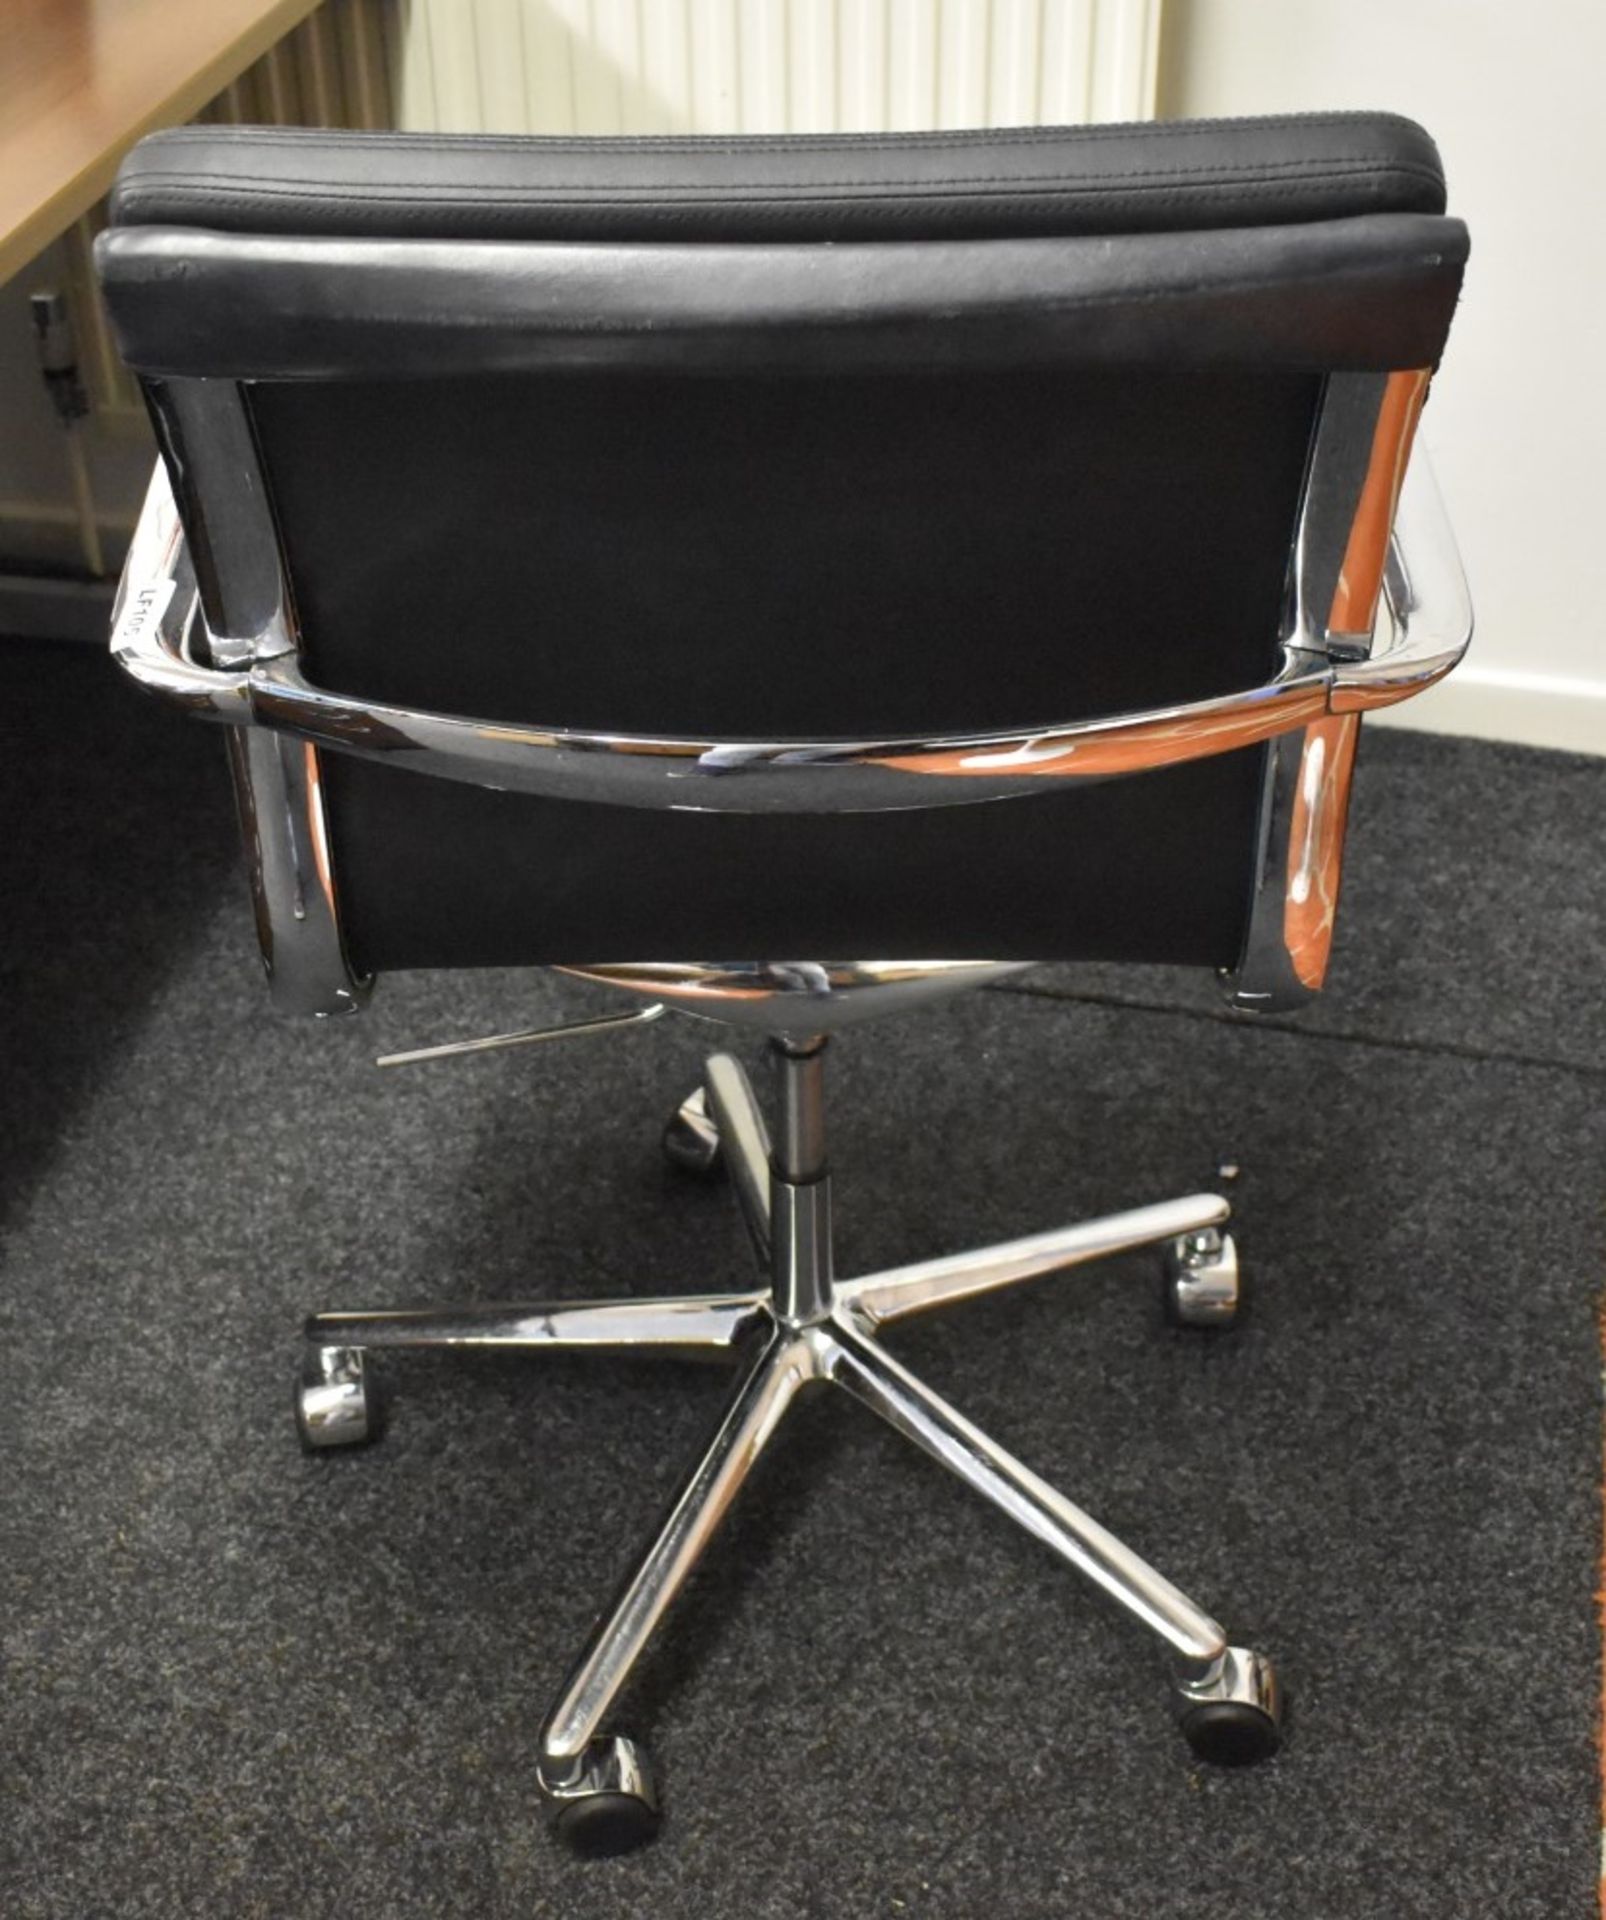 1 x Eames Inspired Office Chair - Swivel Office Chair Upholstered in Black Leather - Image 4 of 6